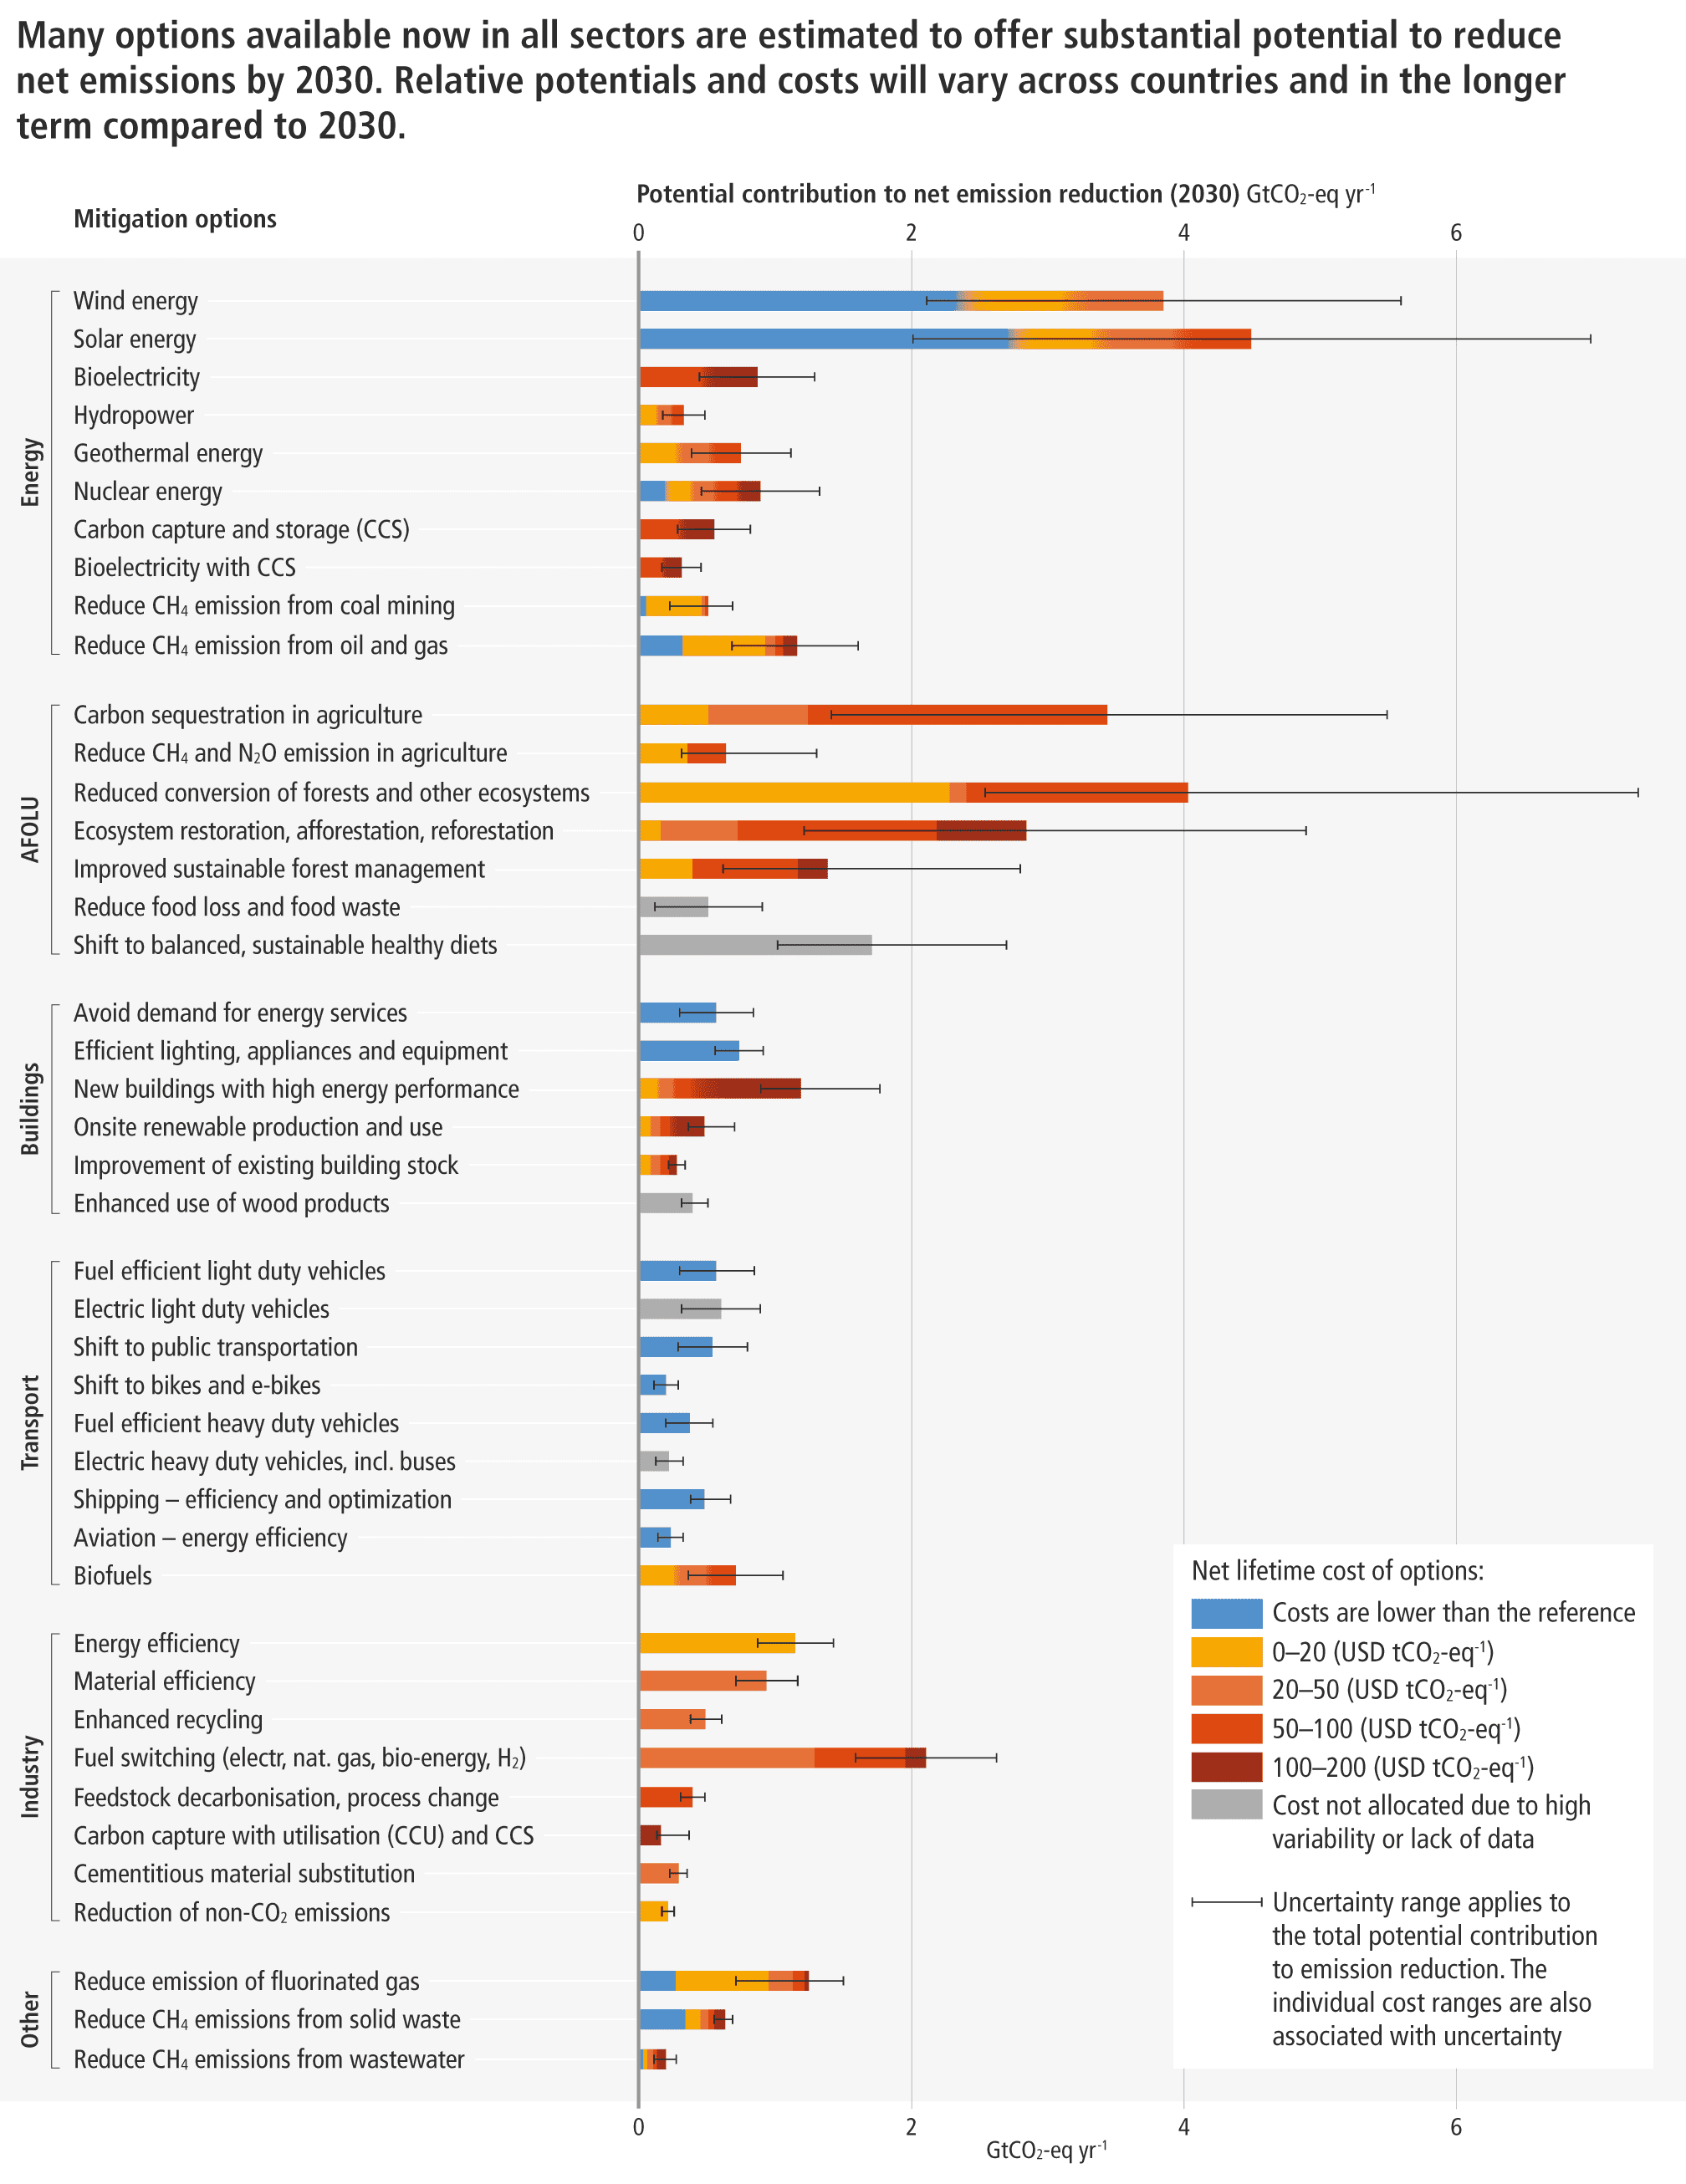 Chart comparing climate change mitigation options and their estimated ranges of cost and potentials in 2030